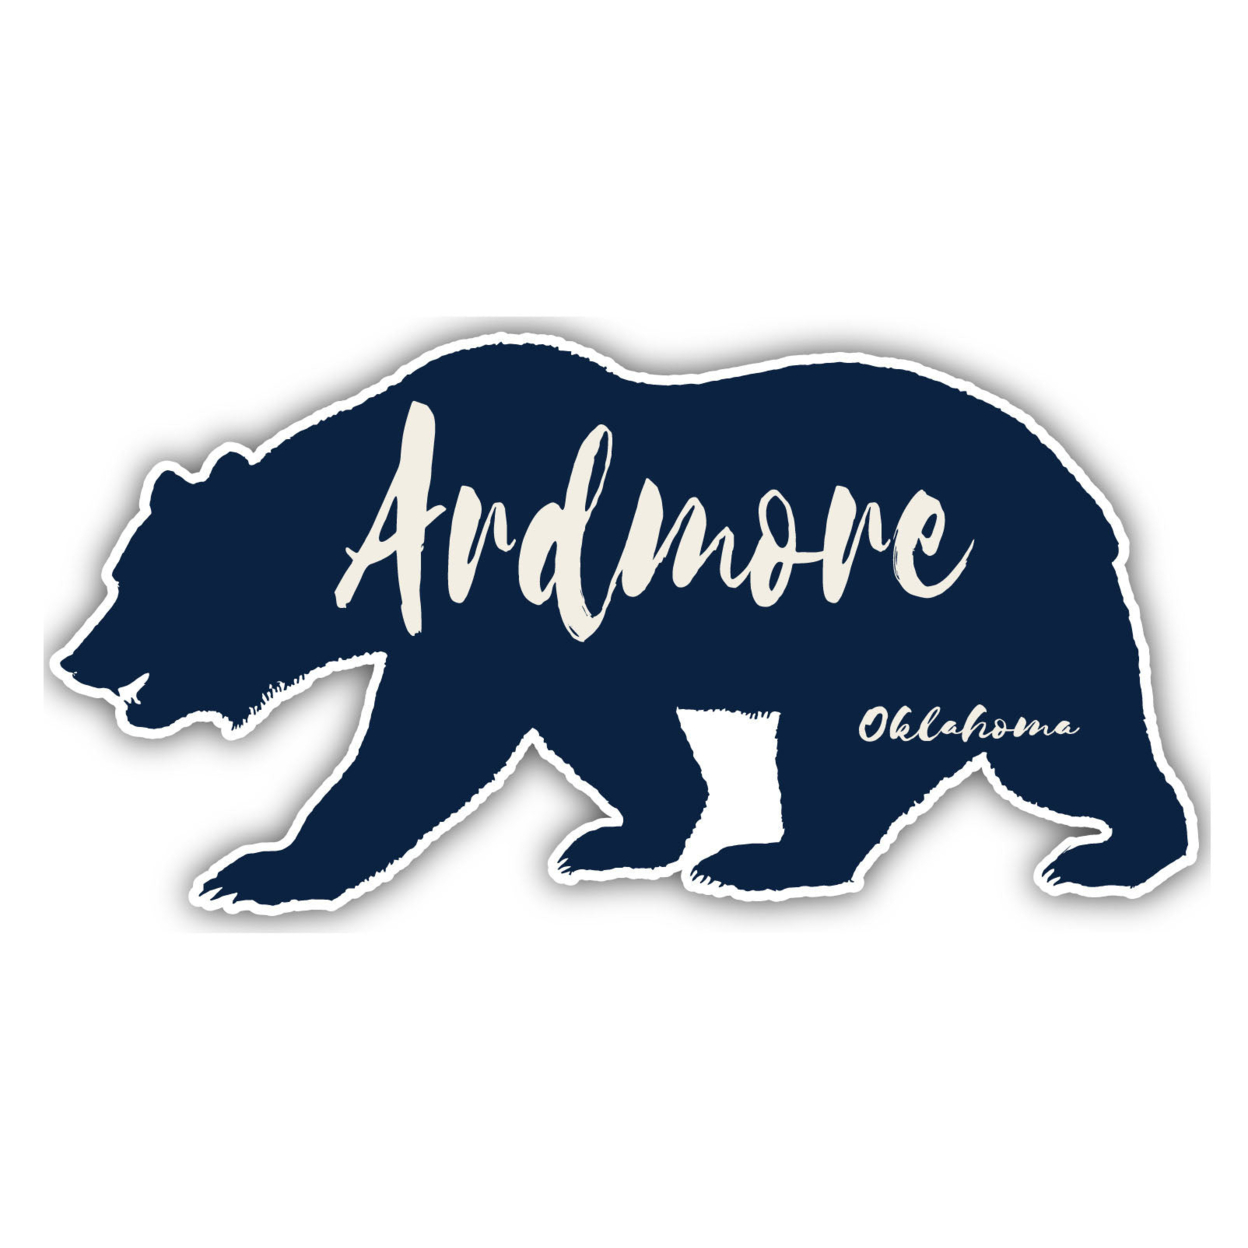 Ardmore Oklahoma Souvenir Decorative Stickers (Choose Theme And Size) - 4-Pack, 8-Inch, Tent